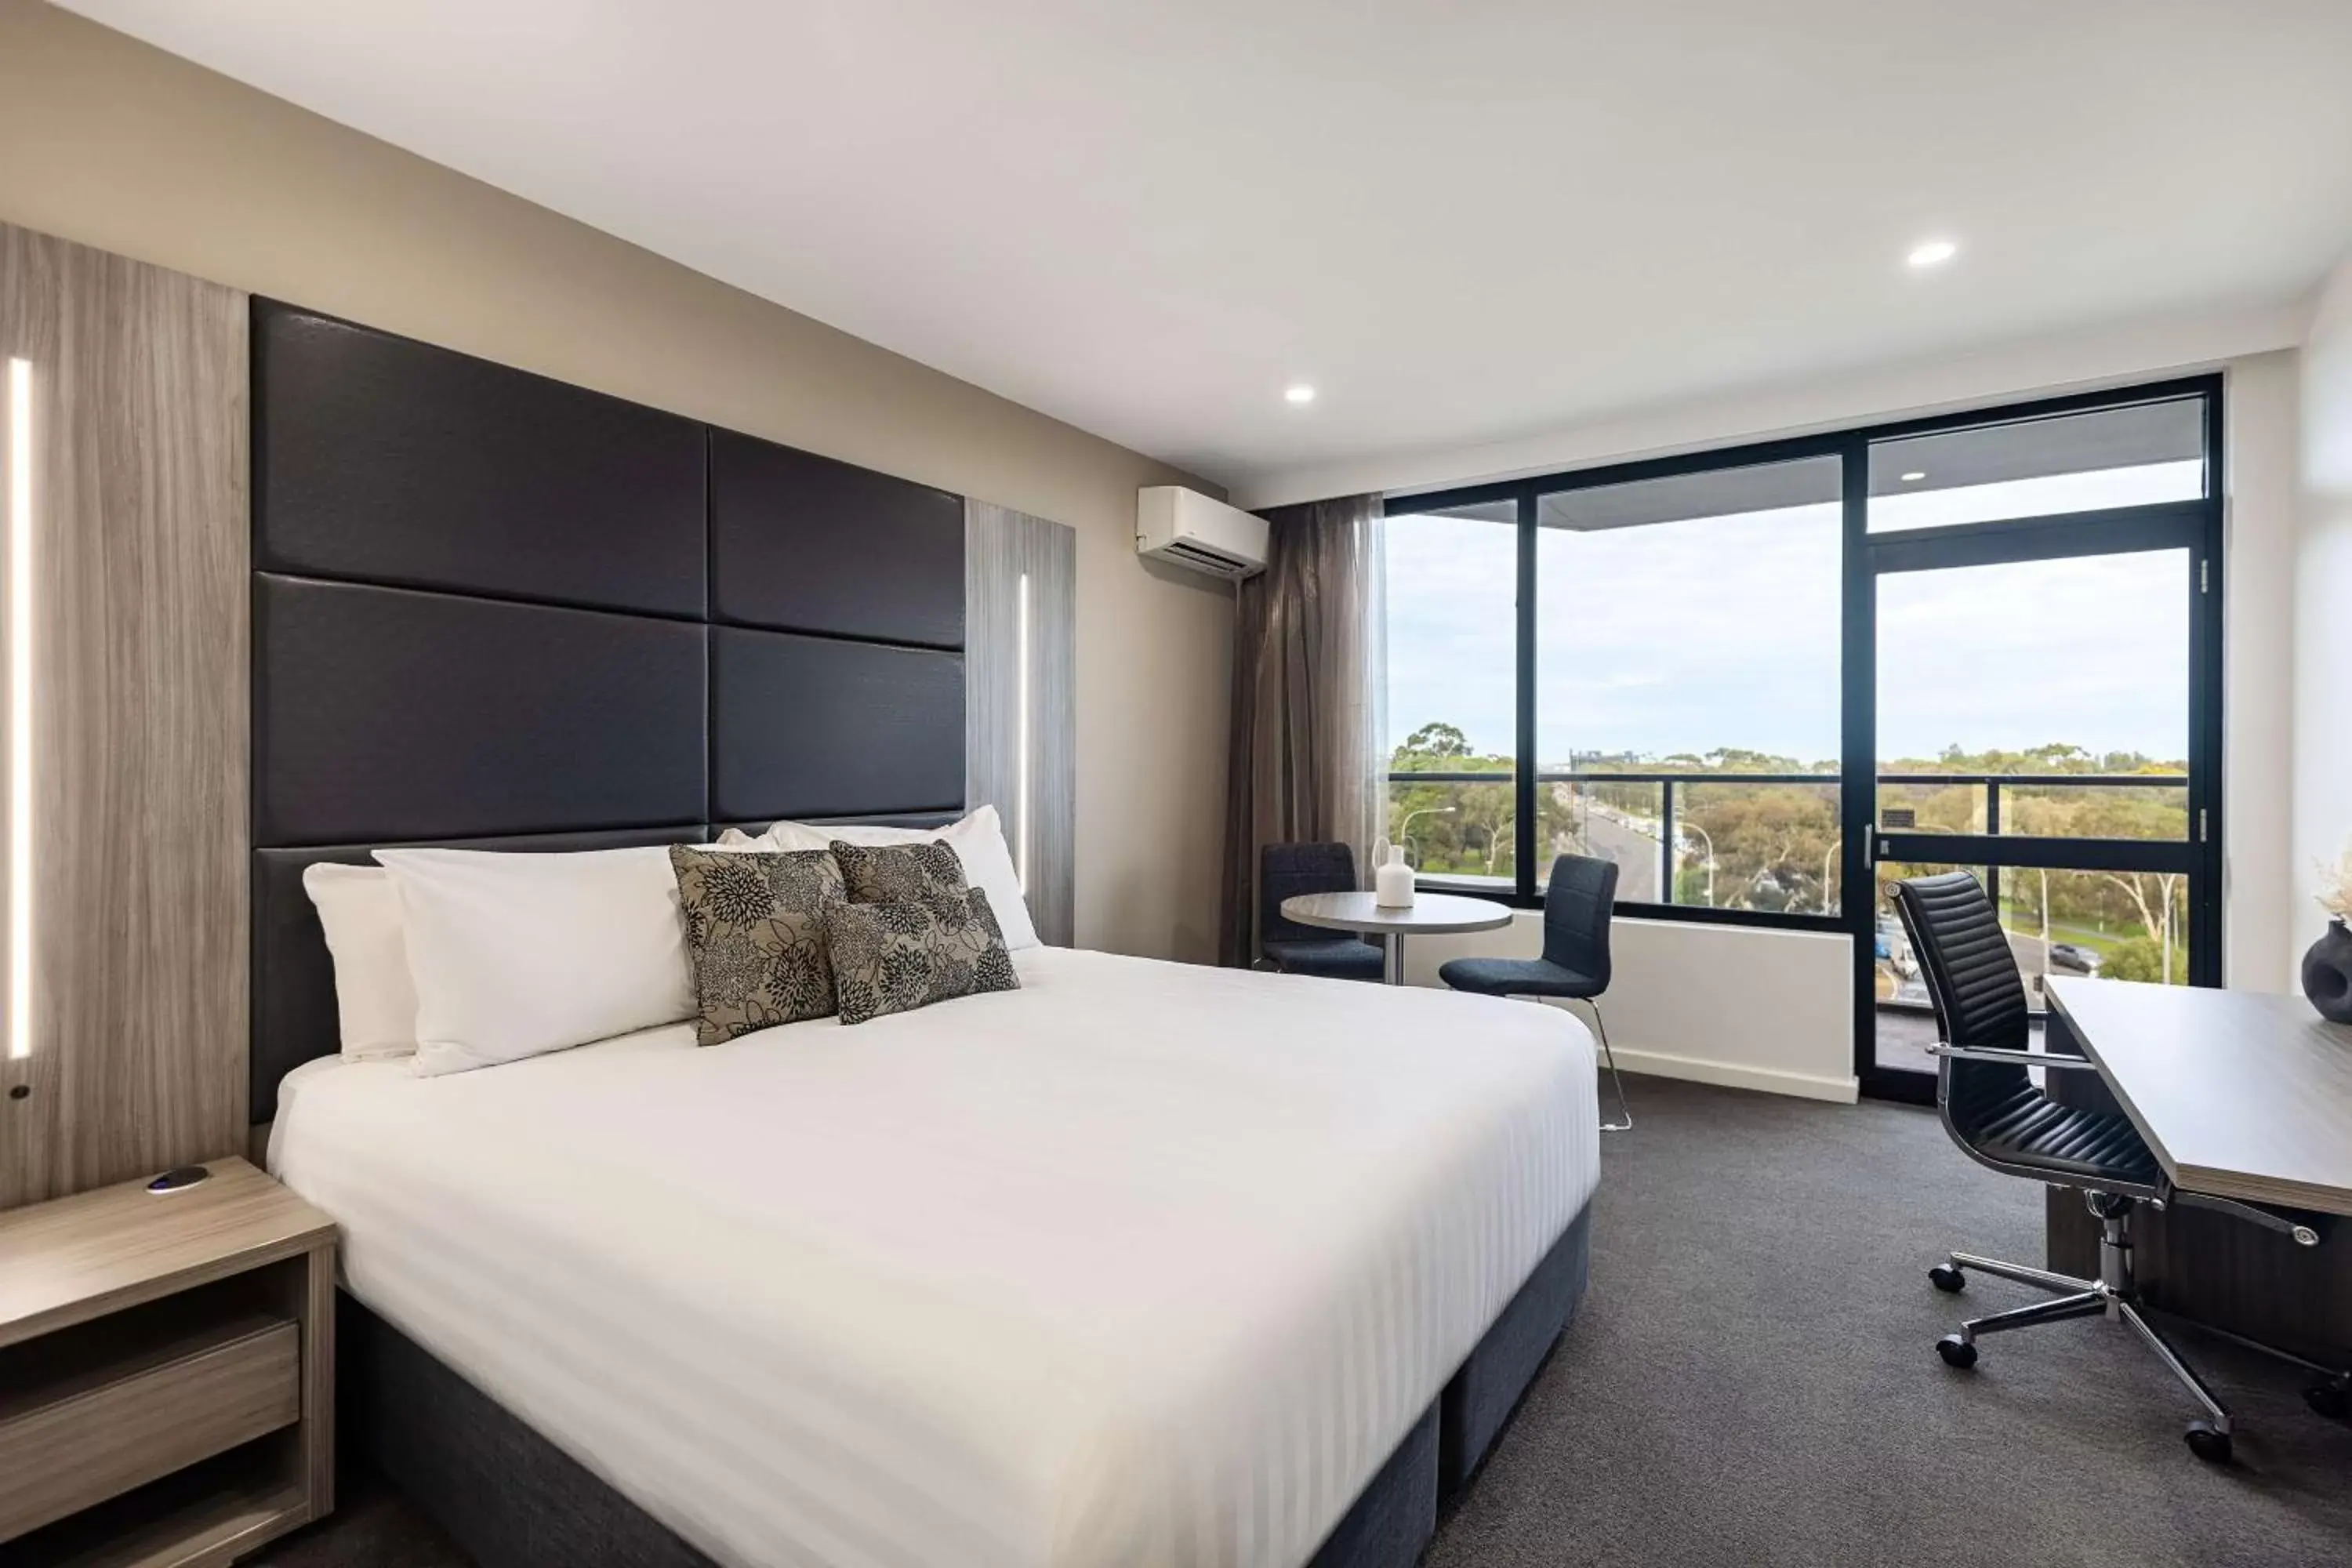 Property building in Rydges South Park Adelaide